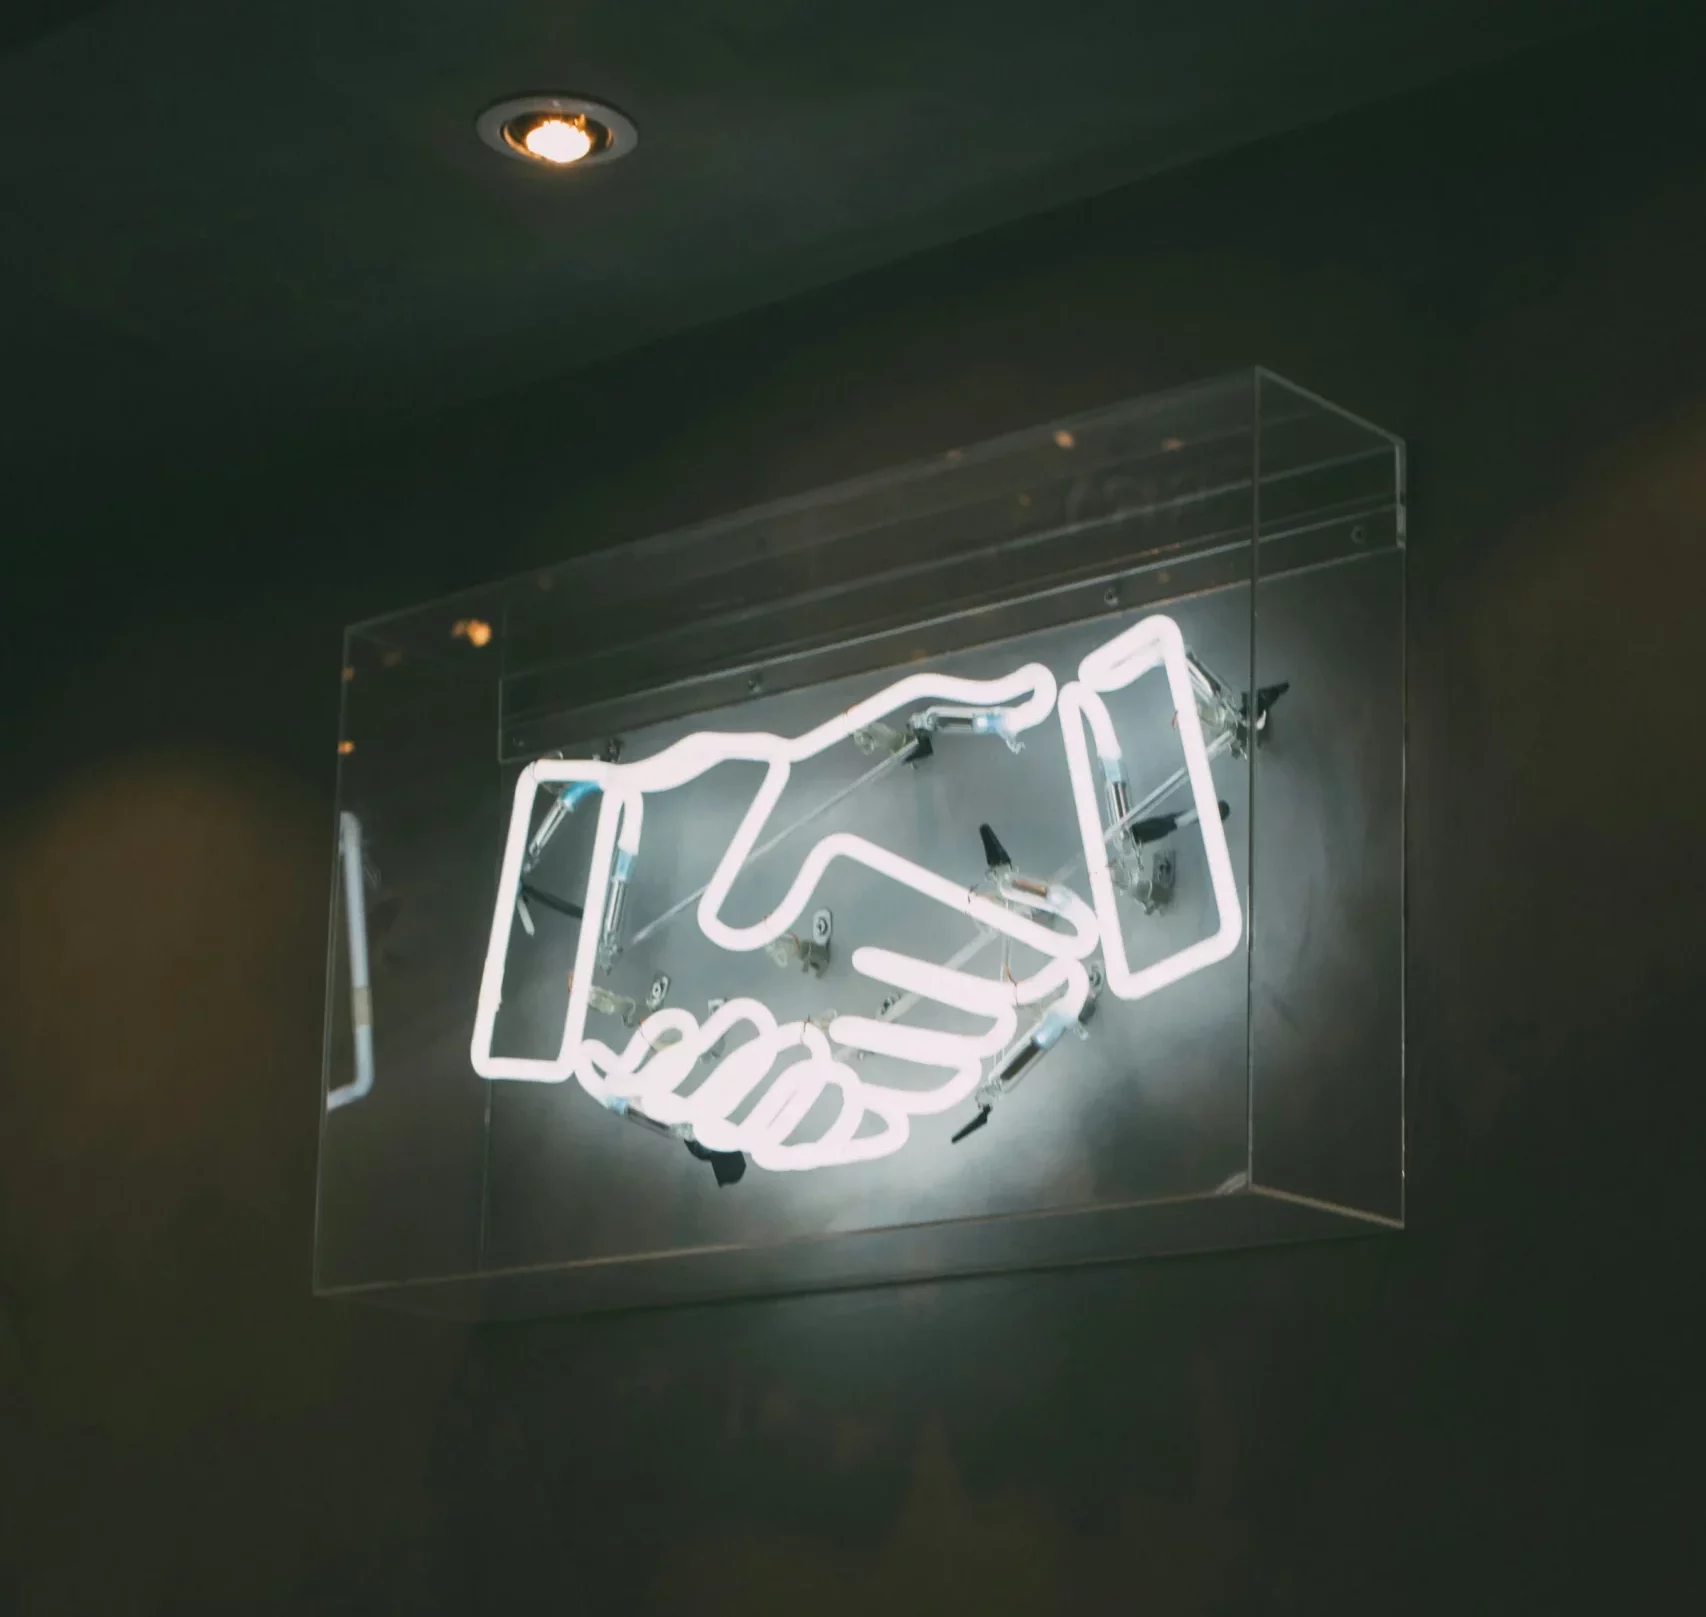 A sign depicting a handshake, showing someone knows how to improve customer communication